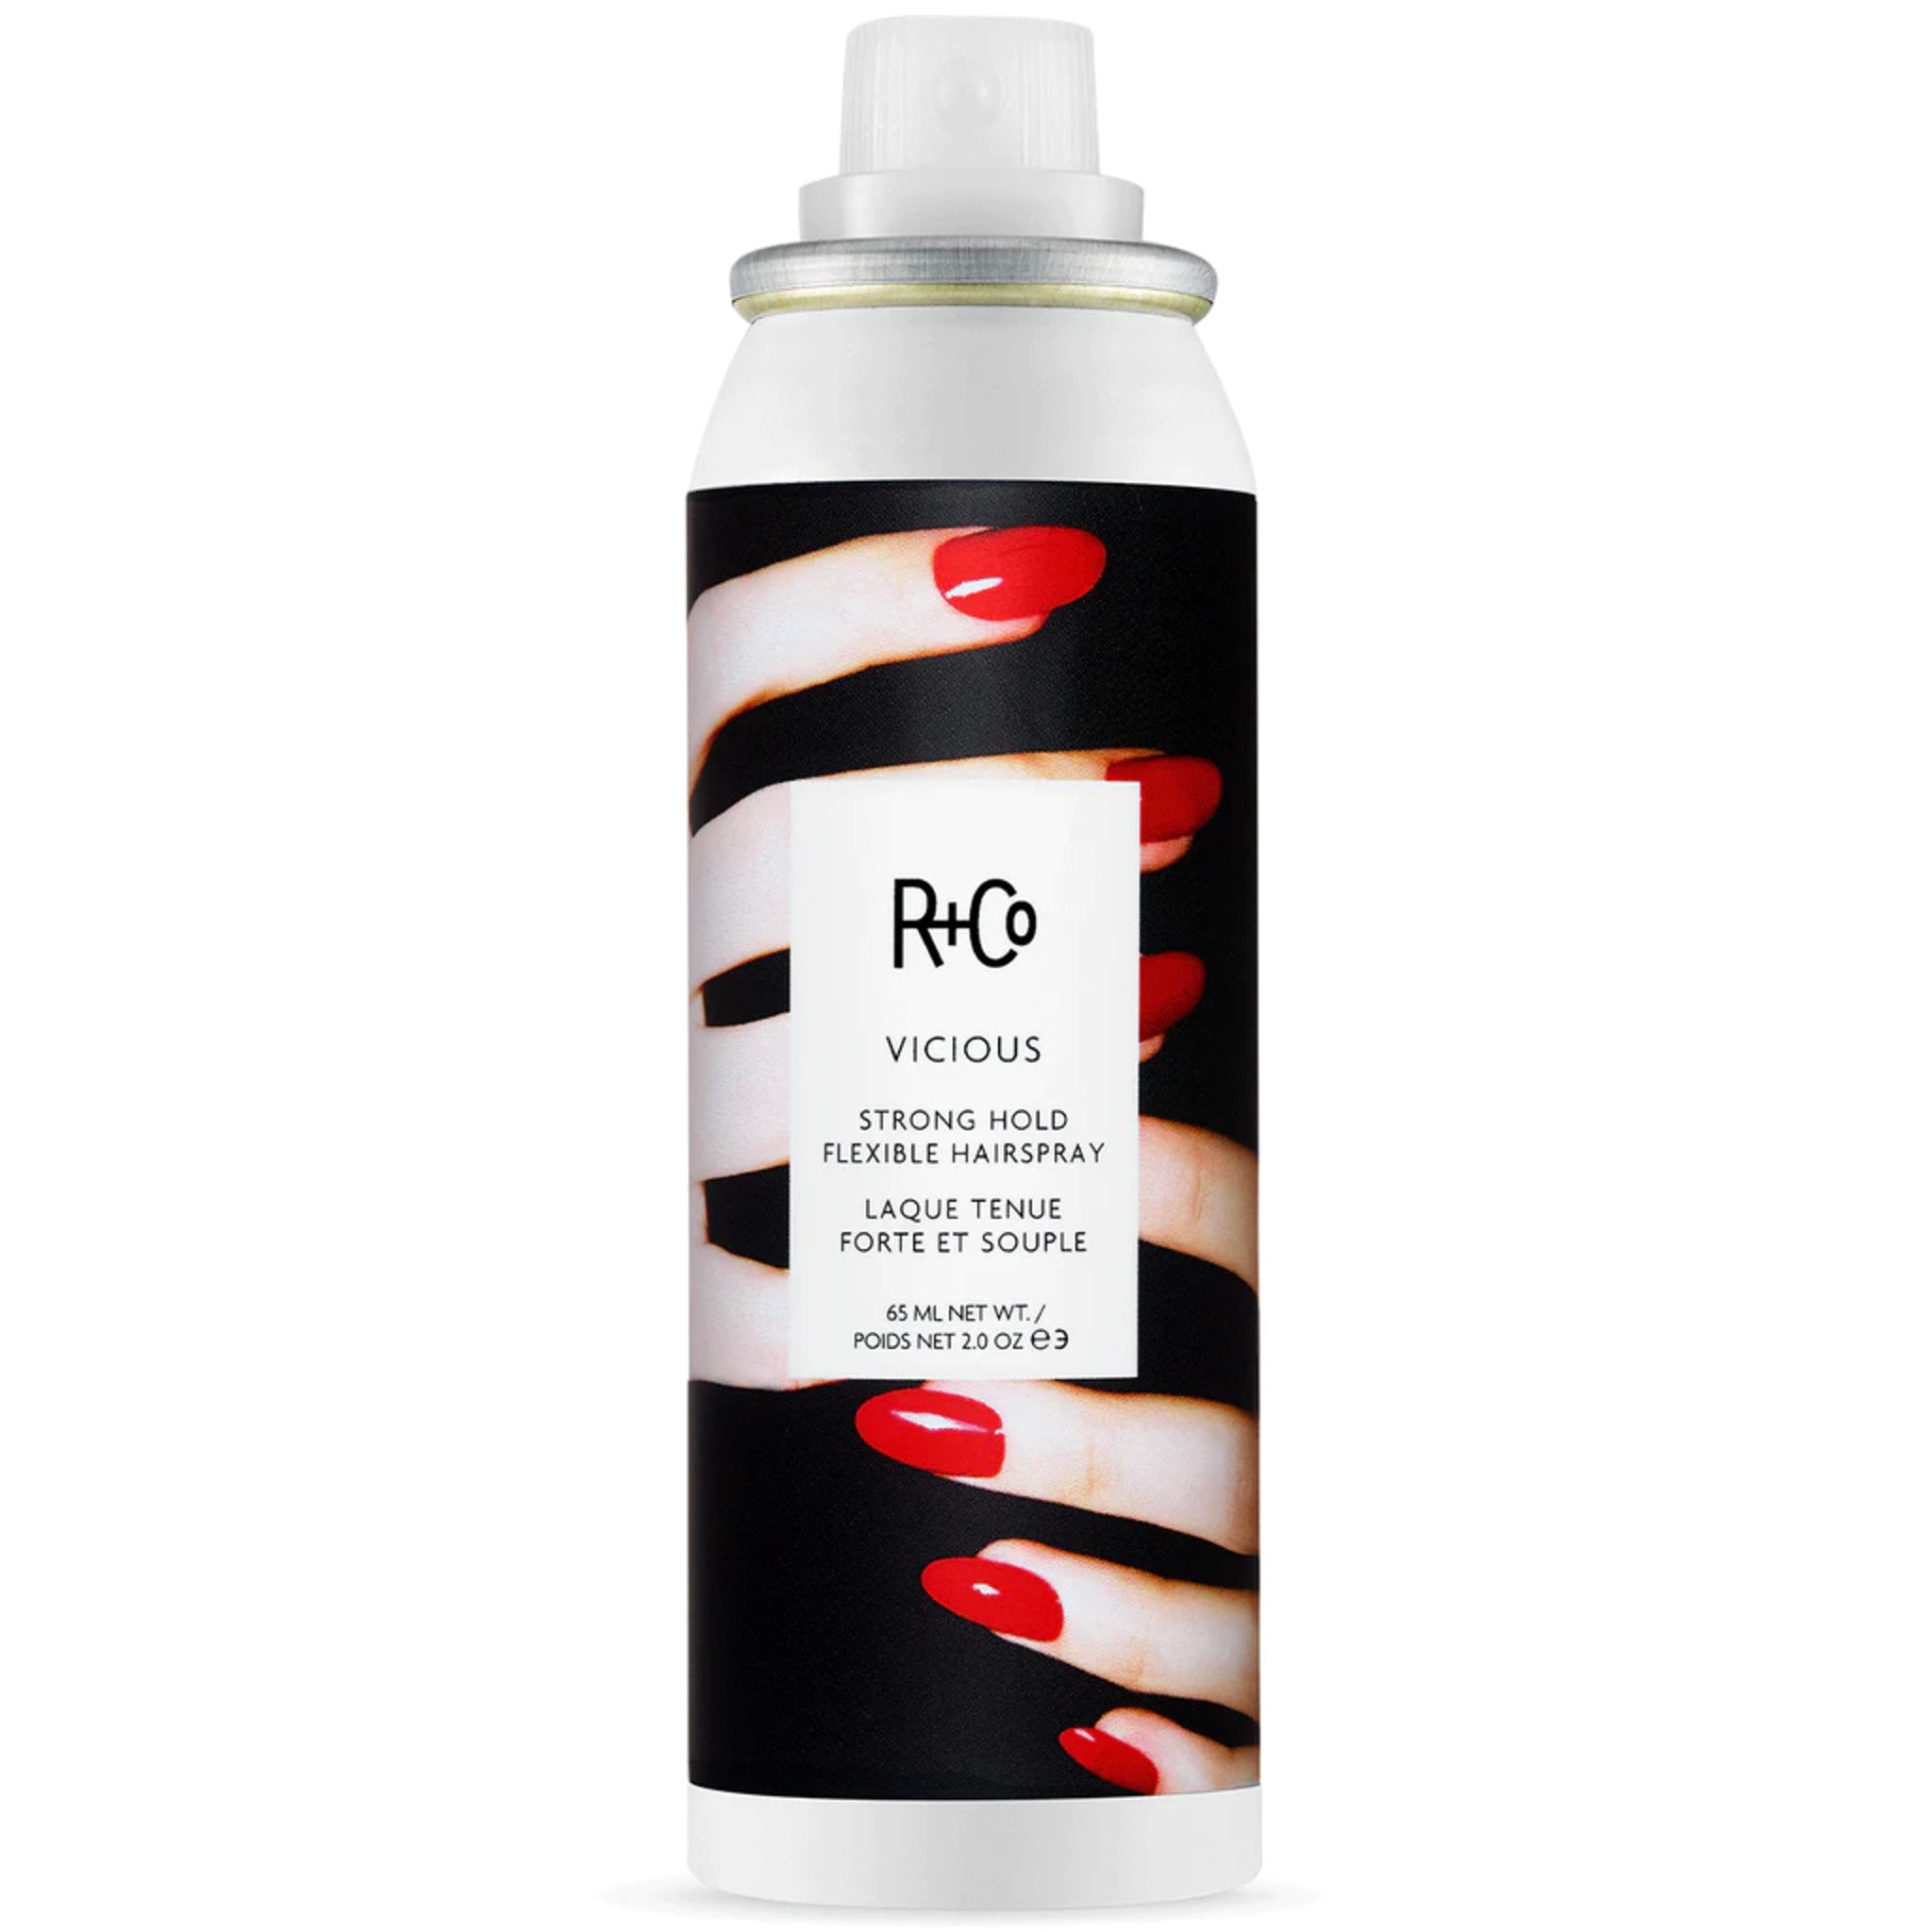 R+Co Vicious Strong Hold Flexible Hairspray Size variant: 2 fl oz main image.